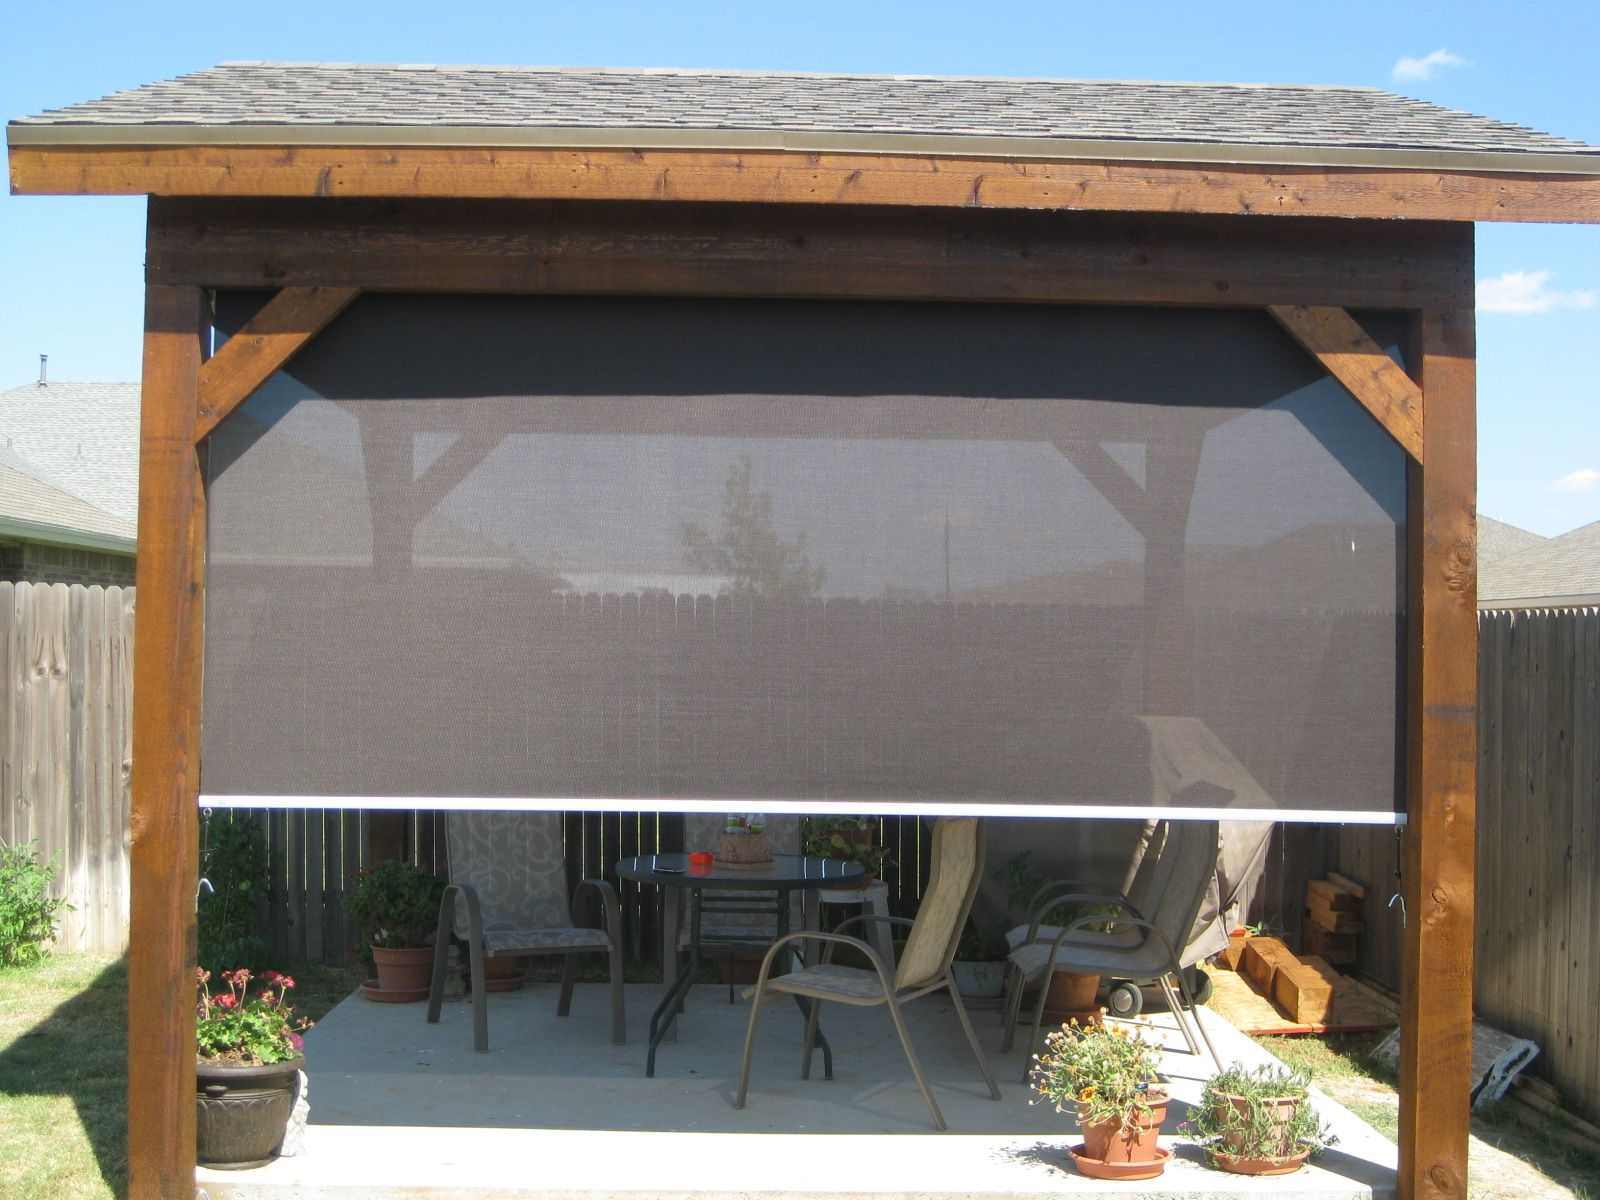 Home Blinds Shutters Roller Shades Patio Shades Solar Screens About intended for proportions 1600 X 1200